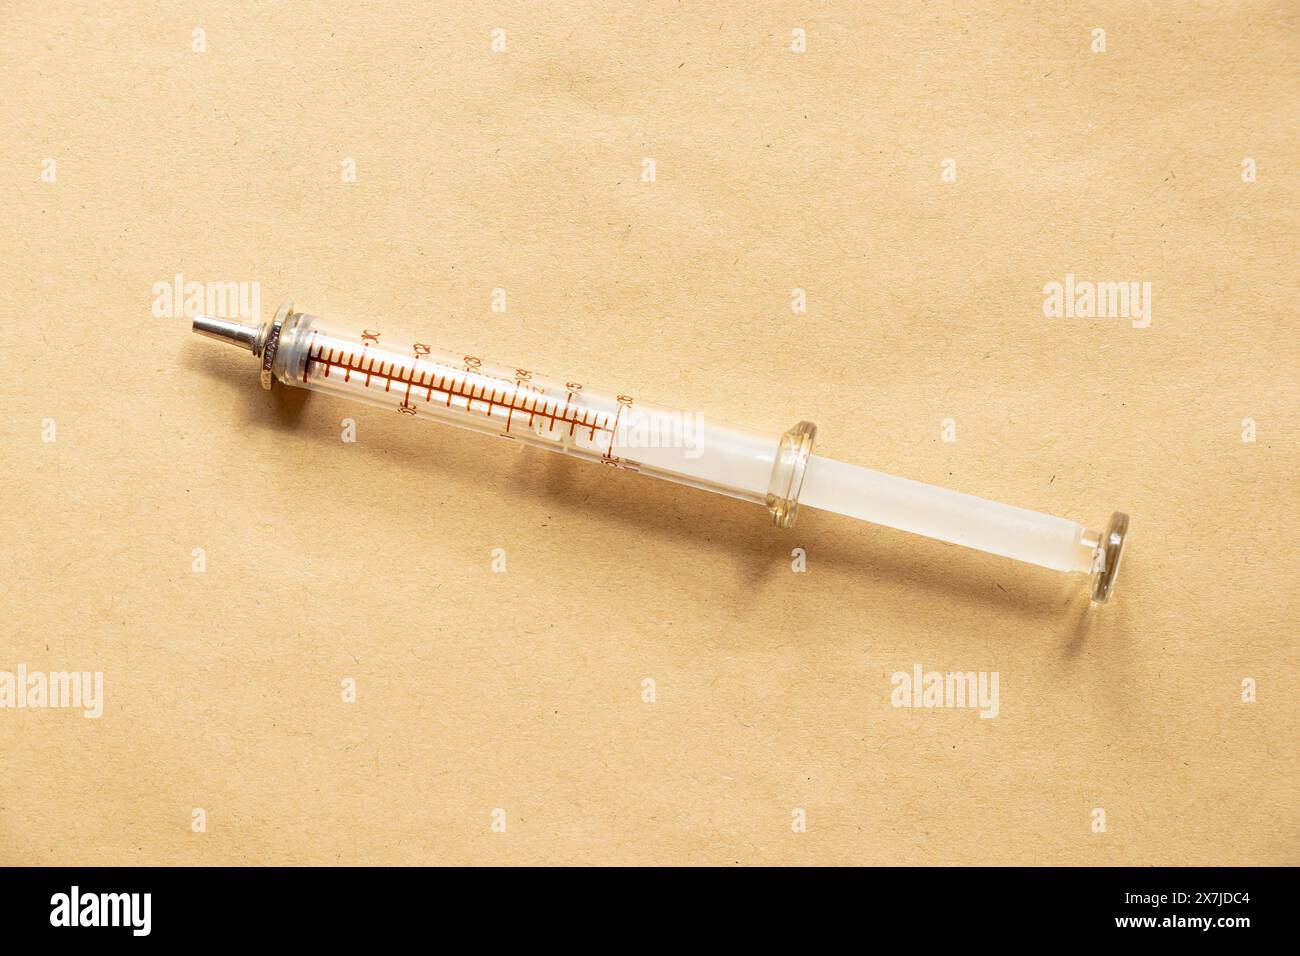 An old glass syringe lies on a brown background close-up Stock Photo